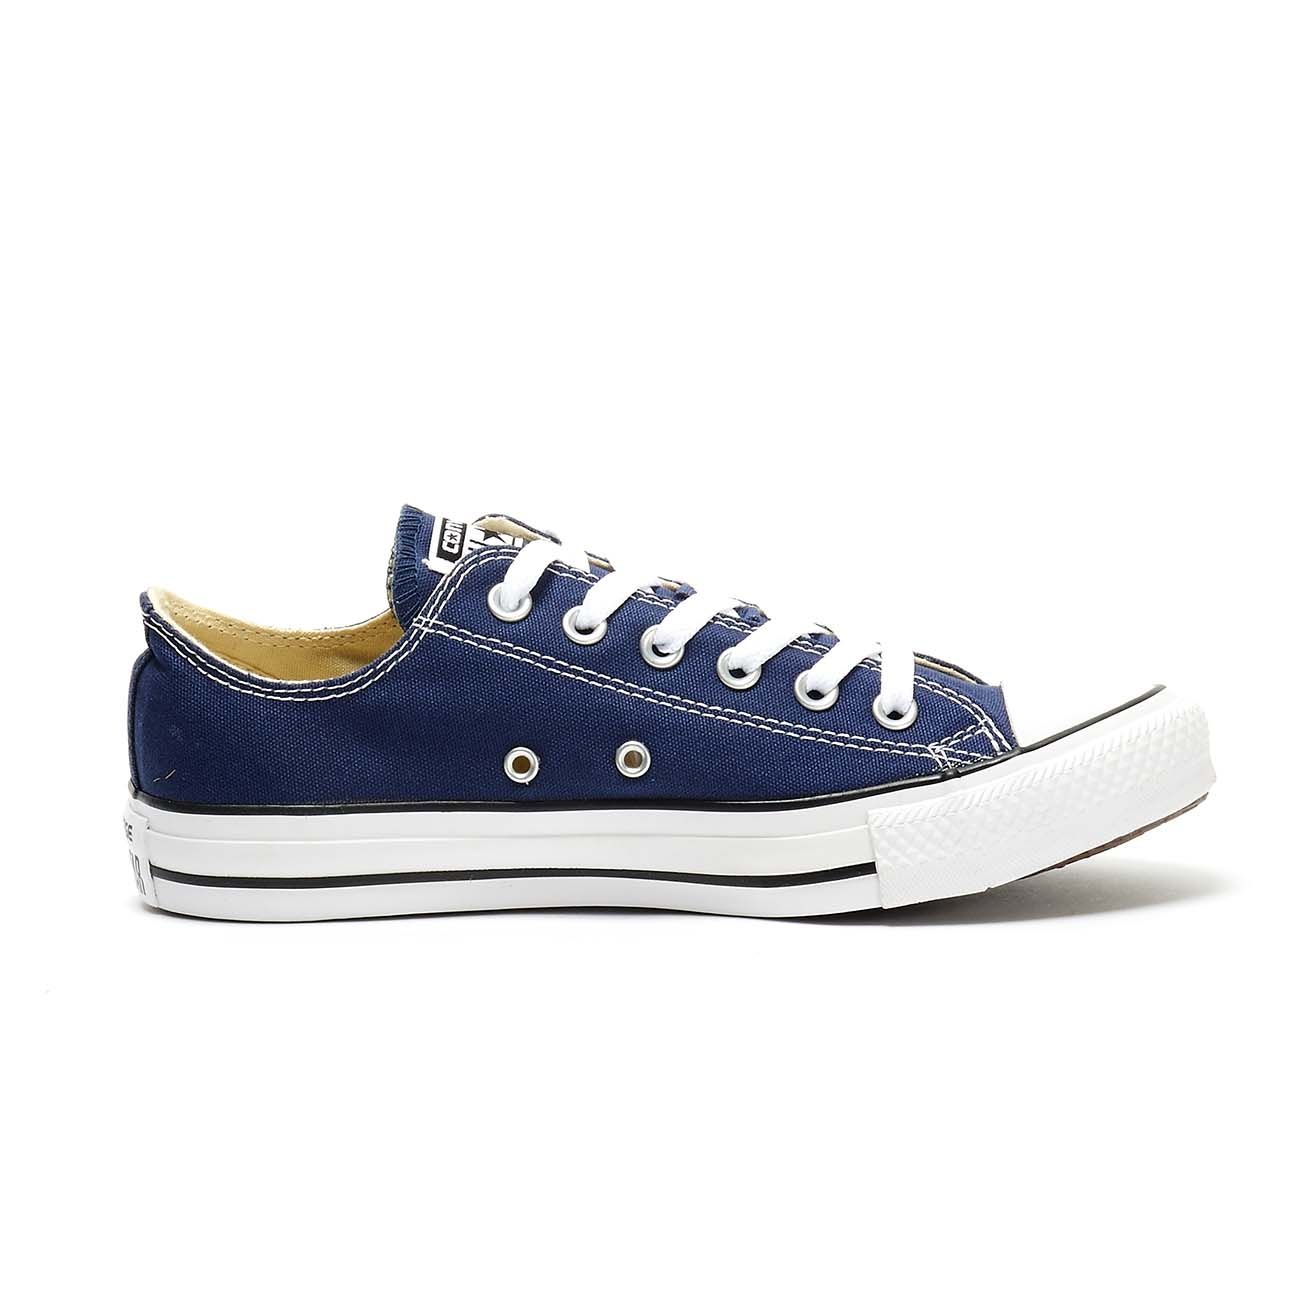 navy chuck taylor all star shoes